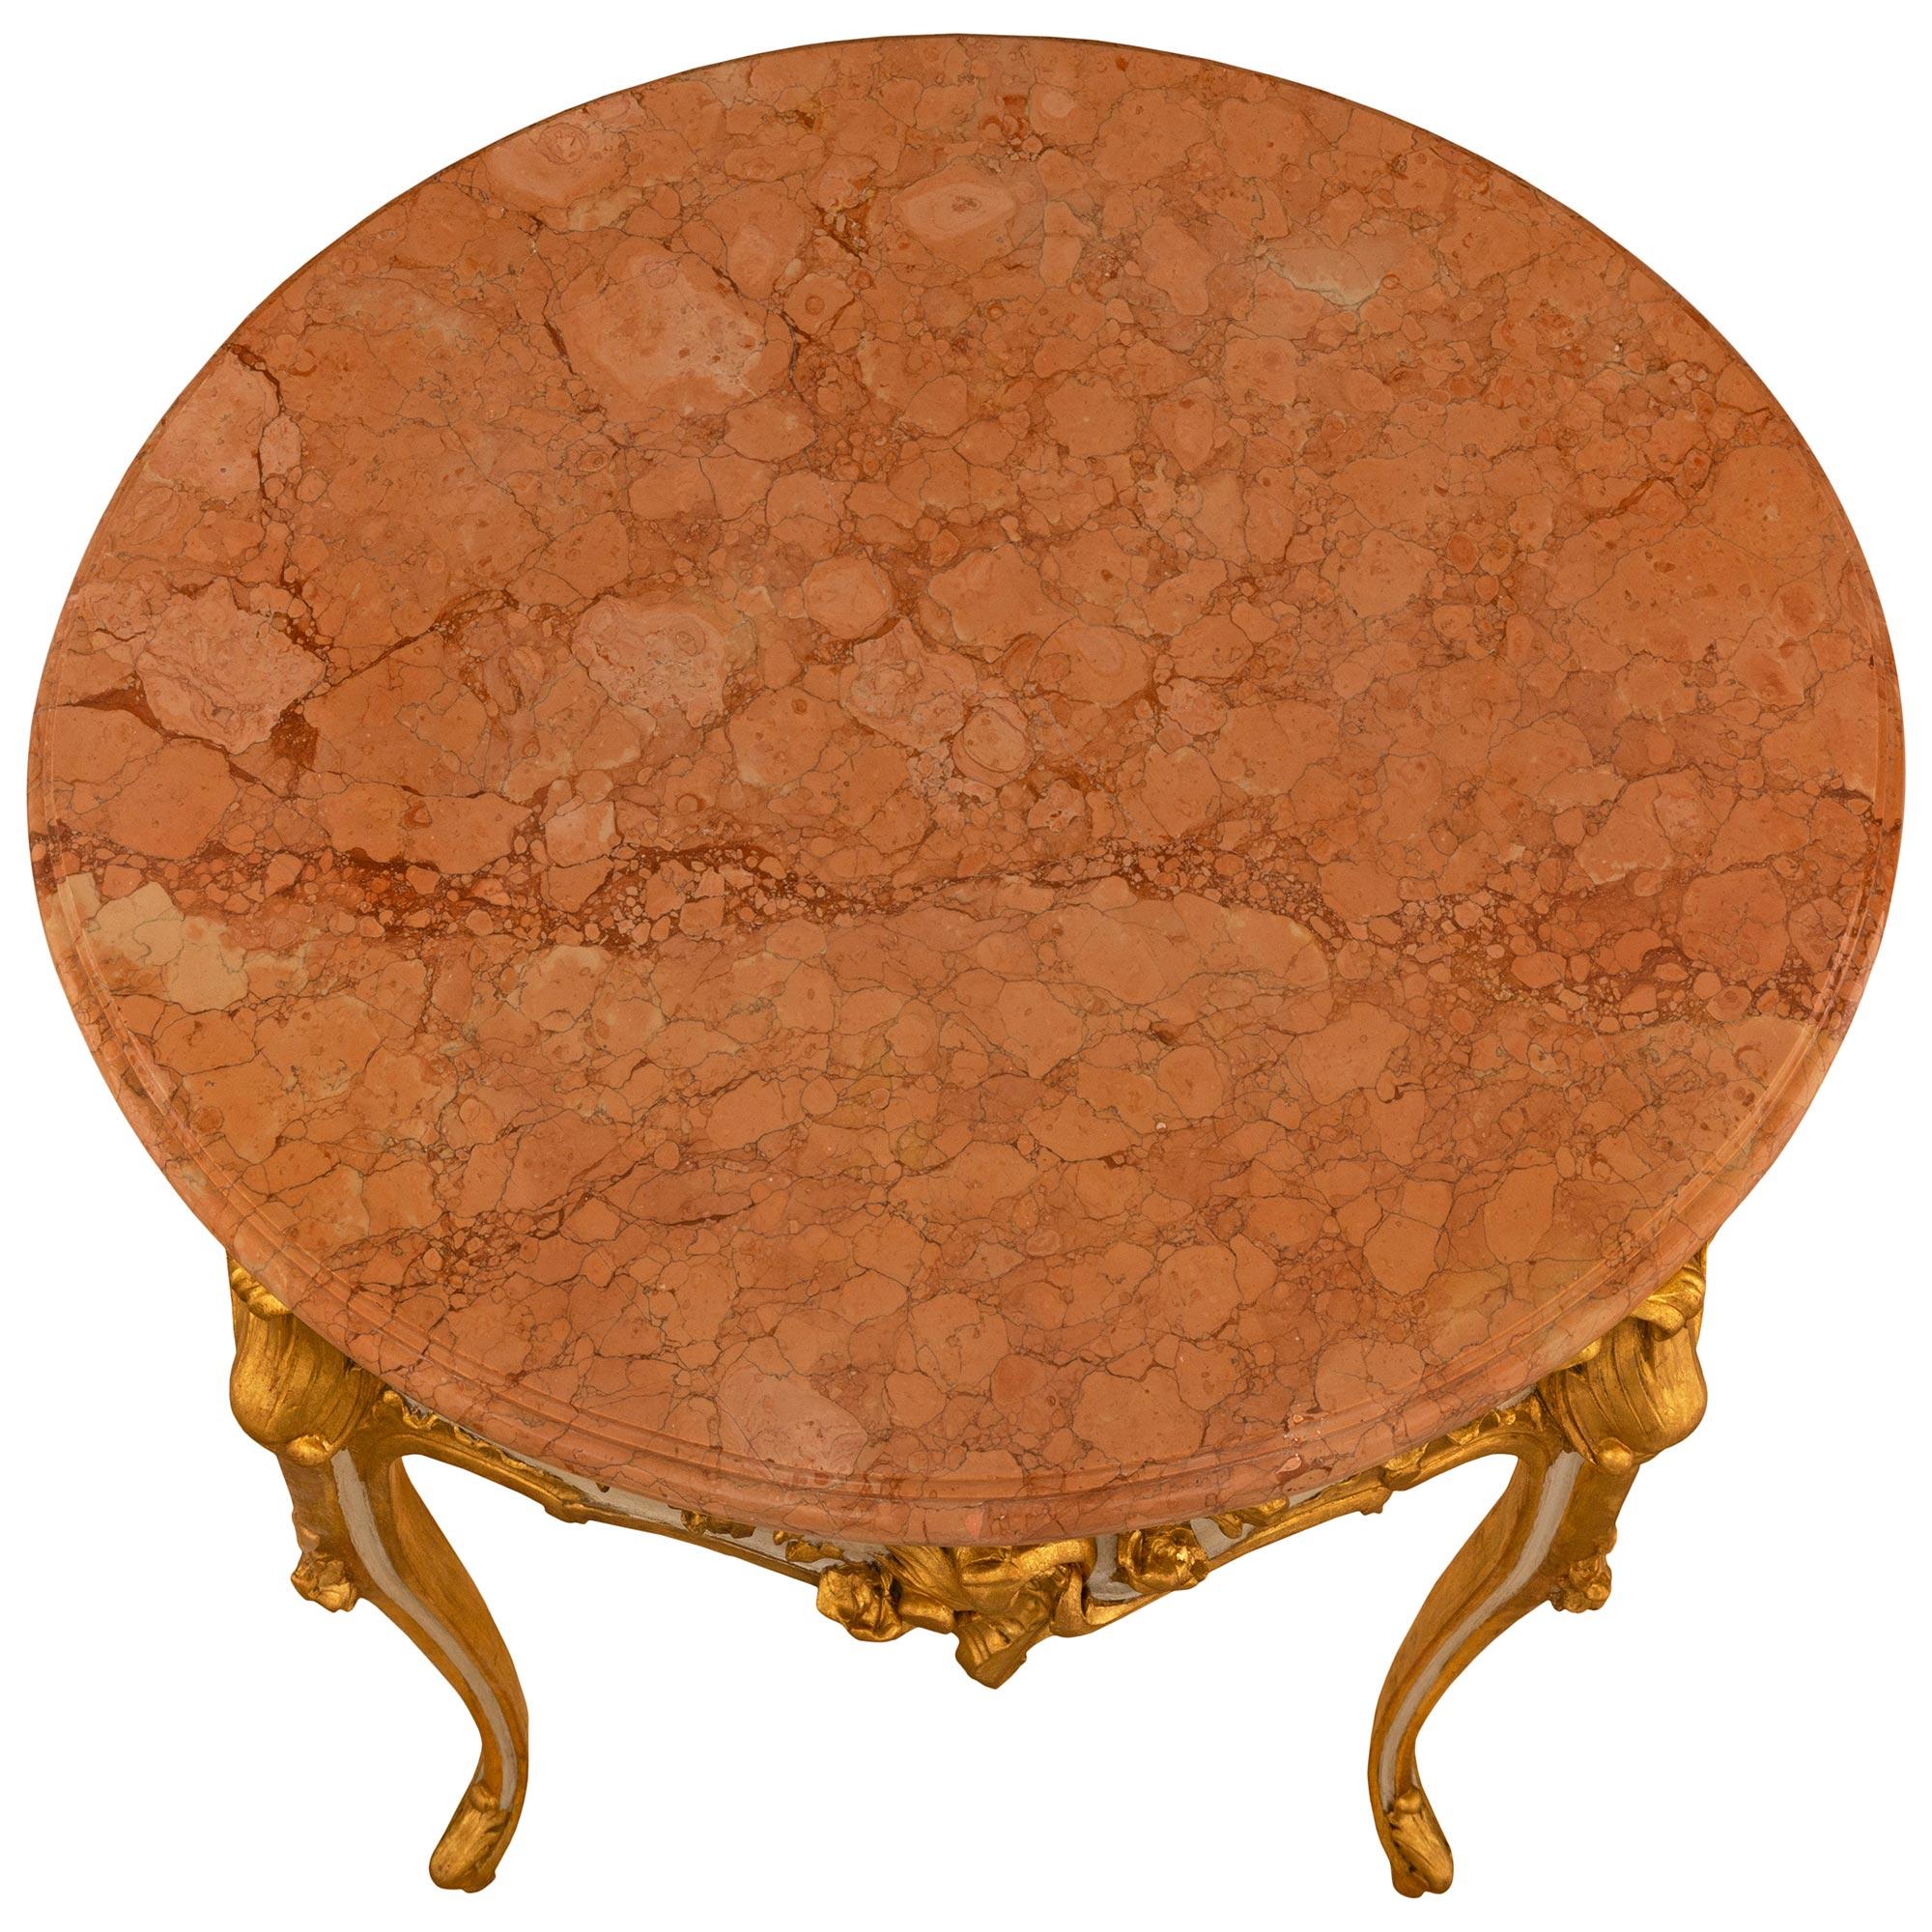 A beautiful and high quality Italian 19th century Louis XV st. patinated wood, Giltwood and Giallo Antico marble side/center table. The circular side table is raised by most elegant 'S' scrolled cabriole legs and supported by feet with an acanthus